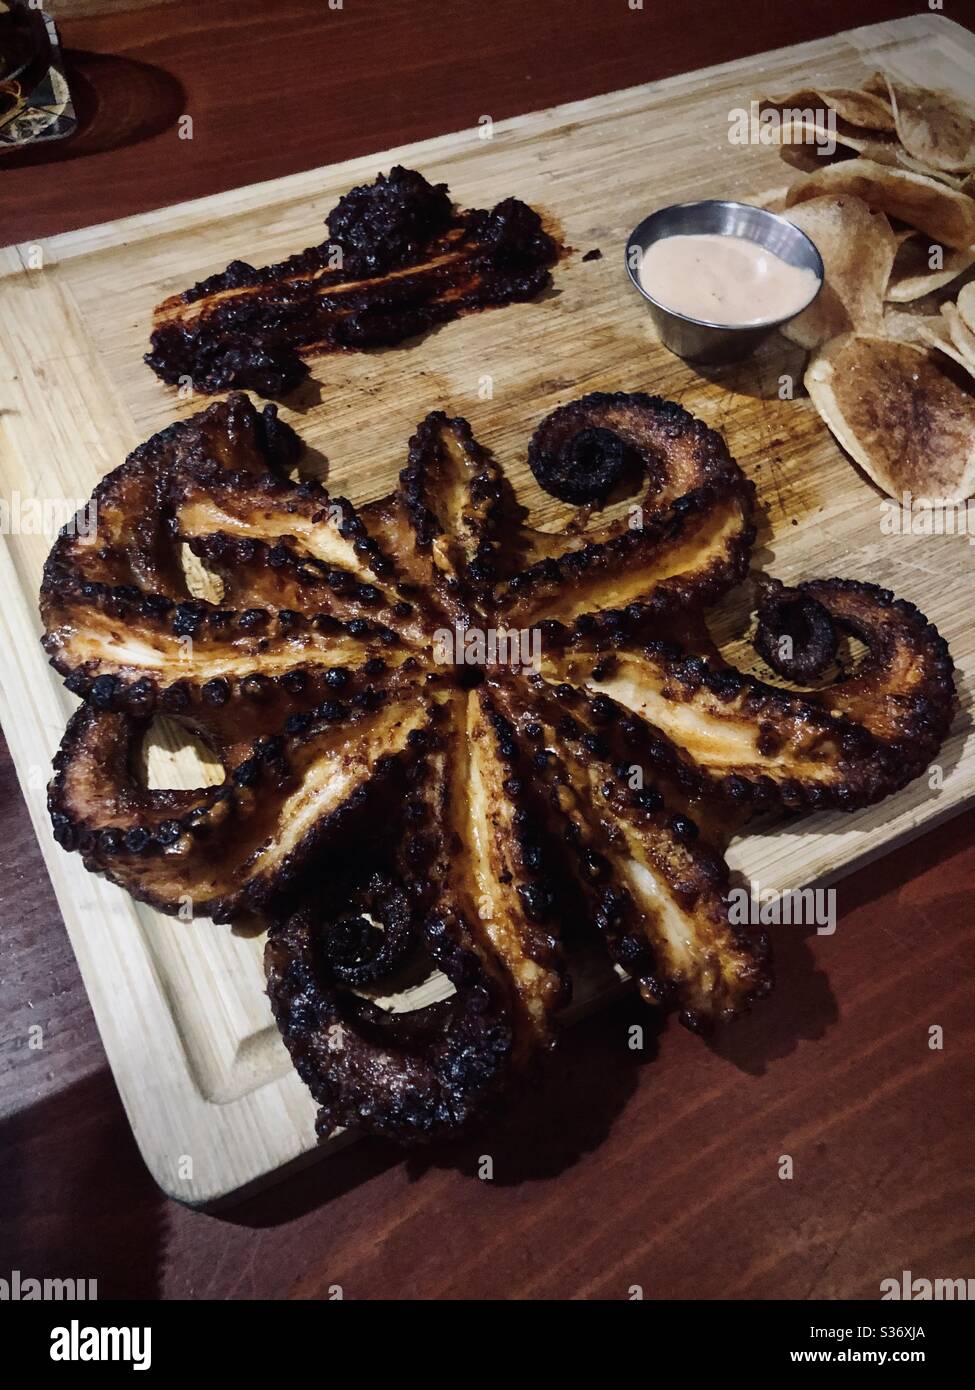 Octopus (Pulpo) dish at a restaurant in Downey CA April 2020 Stock Photo